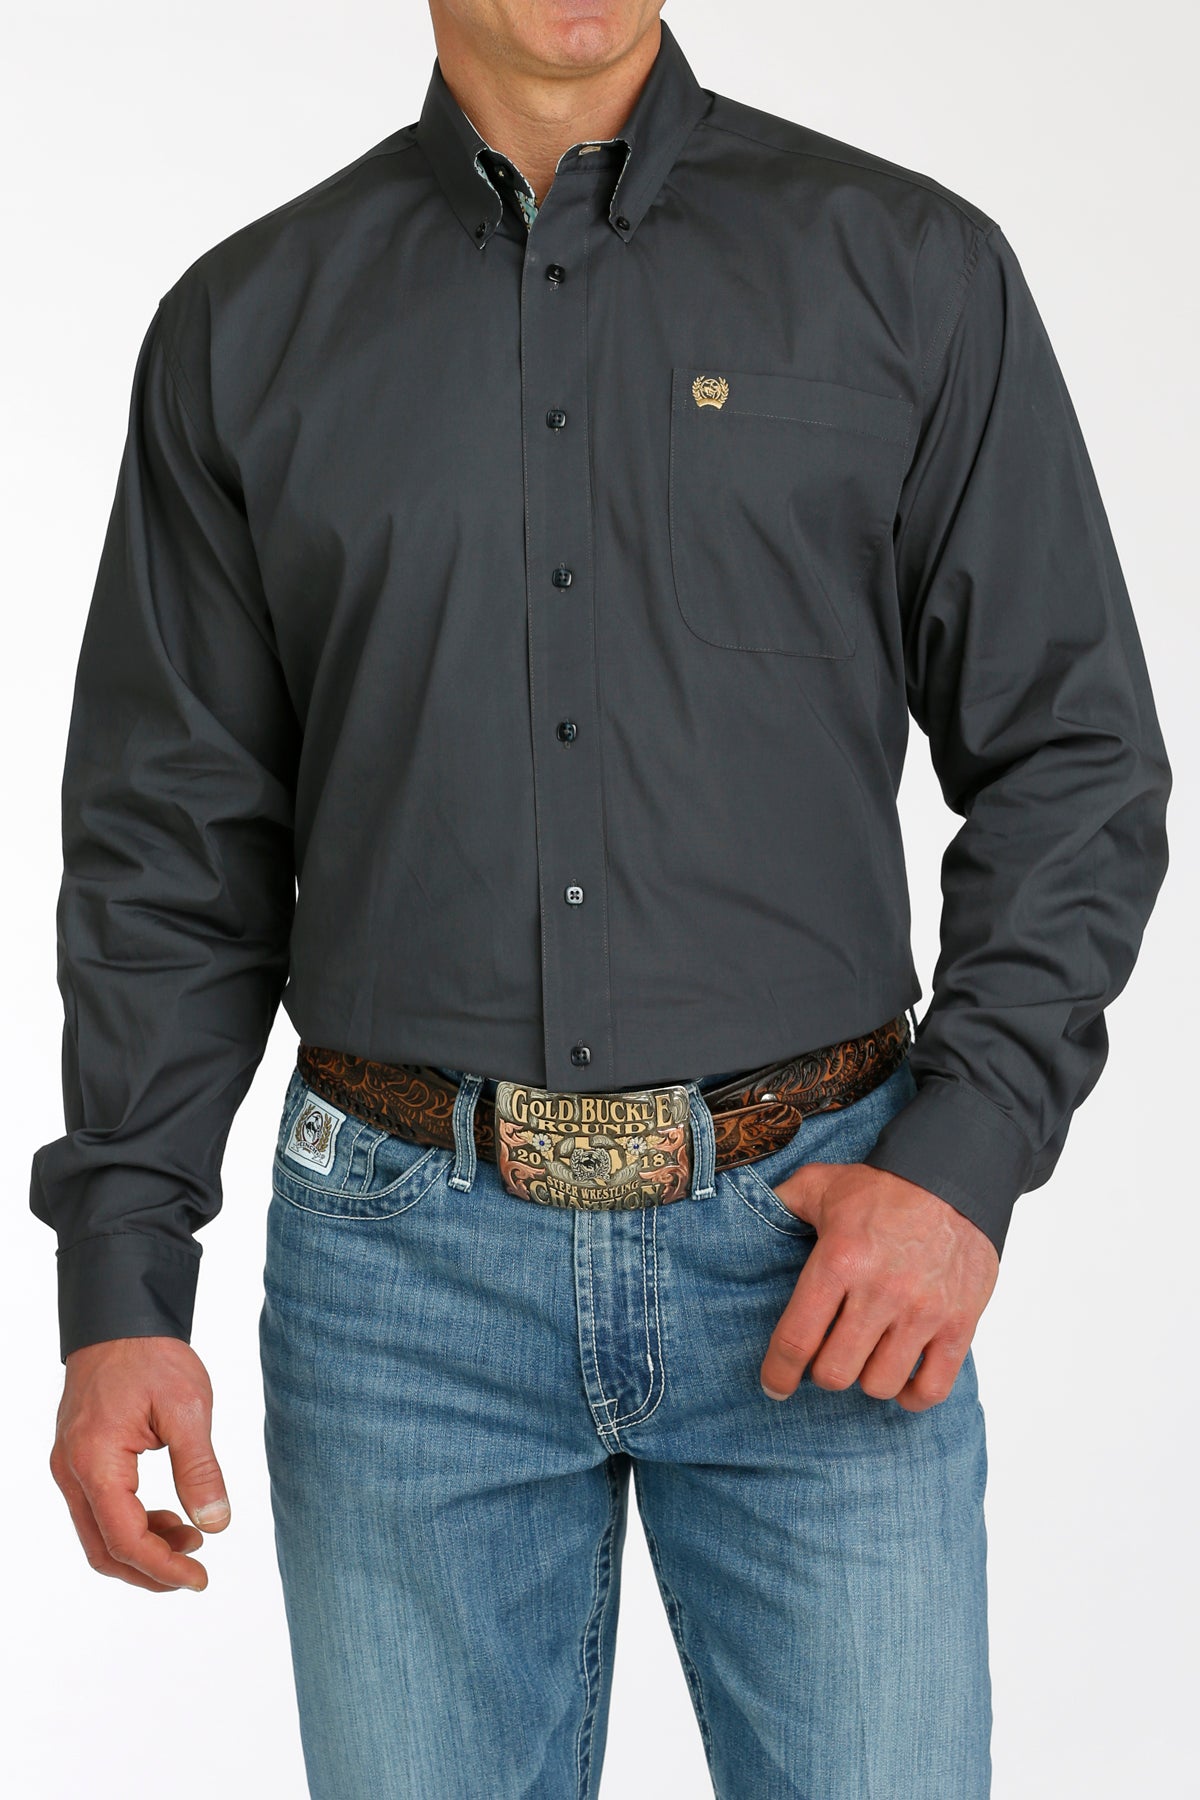 Cinch Men's Classic Fit Solid Charcoal Western Button Down Shirt